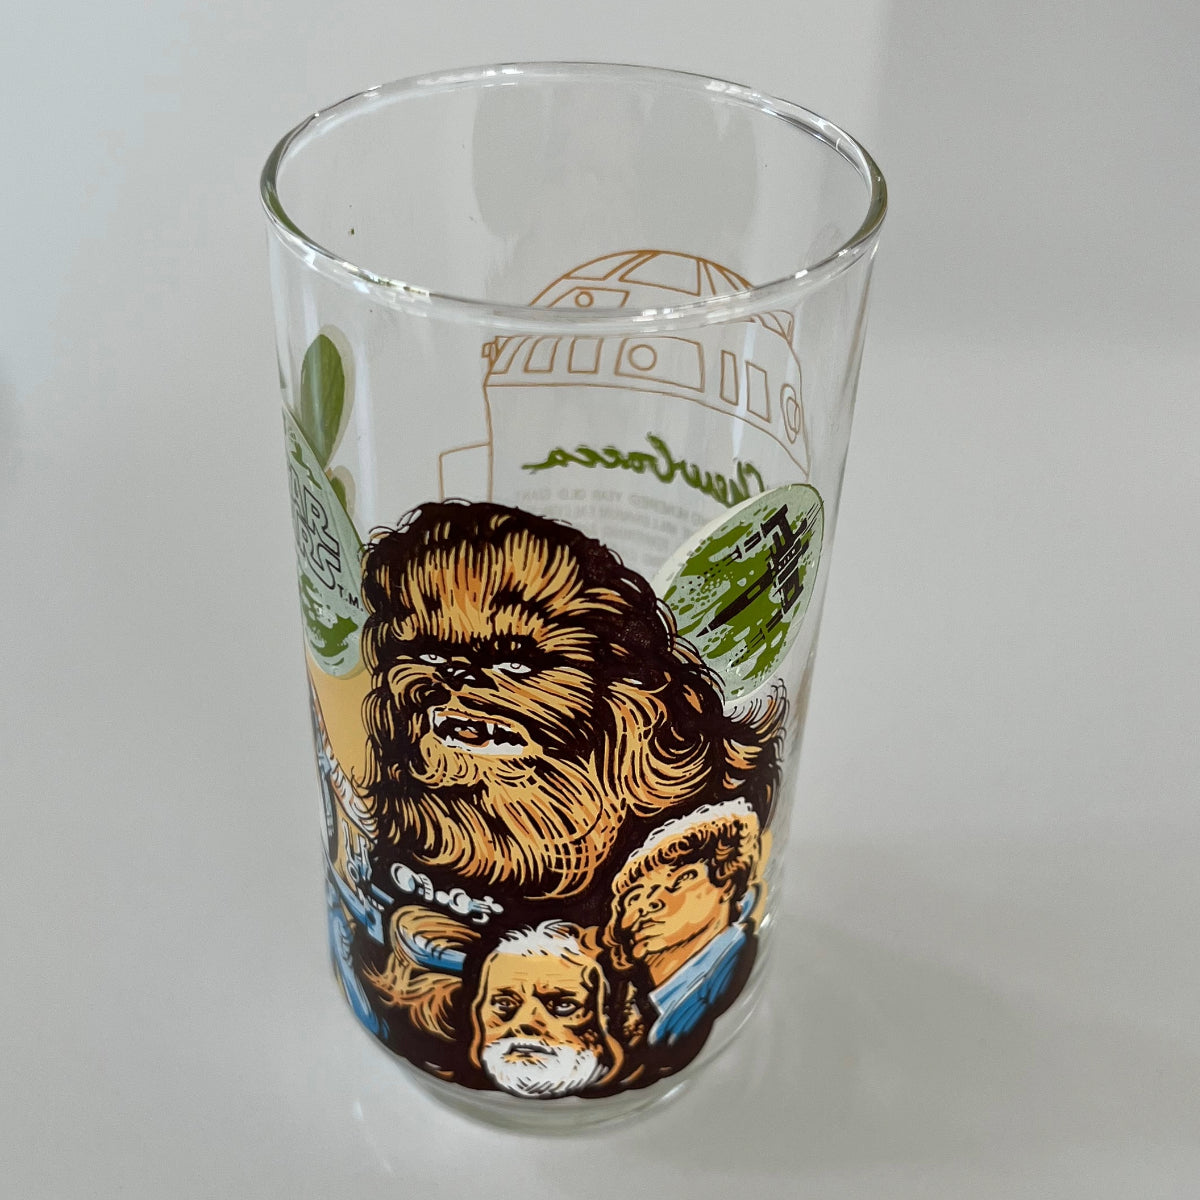 Vintage Burger King Coca Cola Star Wars Chewbacca Collectible Drinking Glass